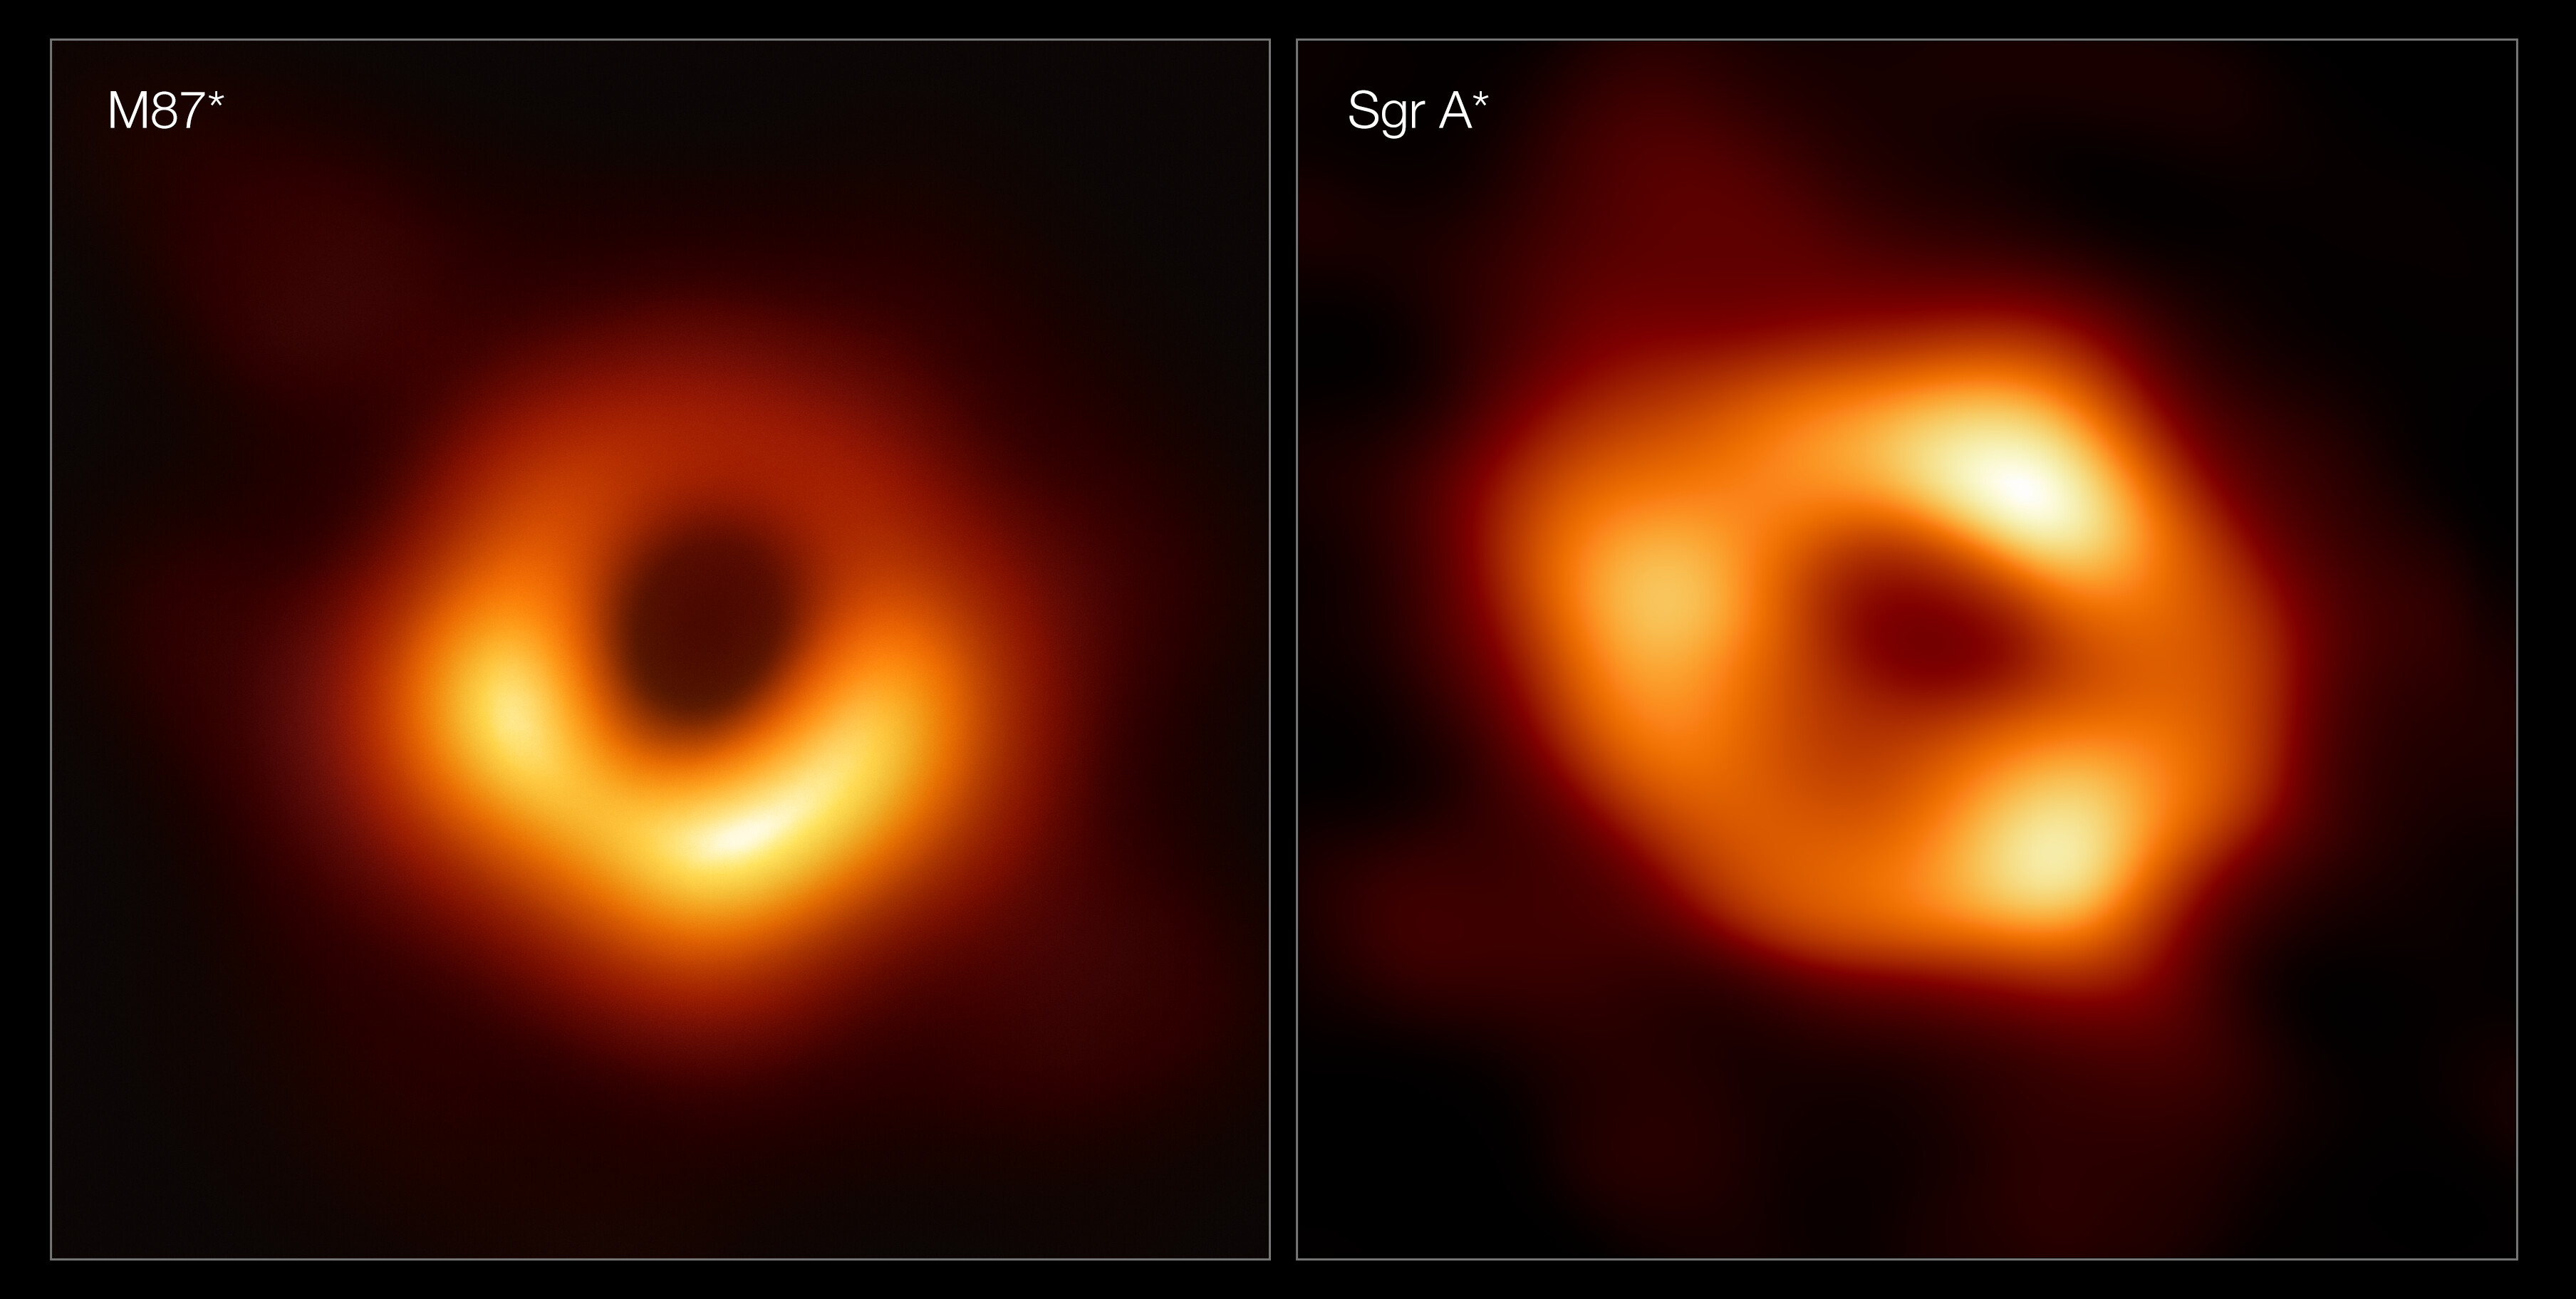 Pictures of two supermassive black holes: M87 * and Sgr A *